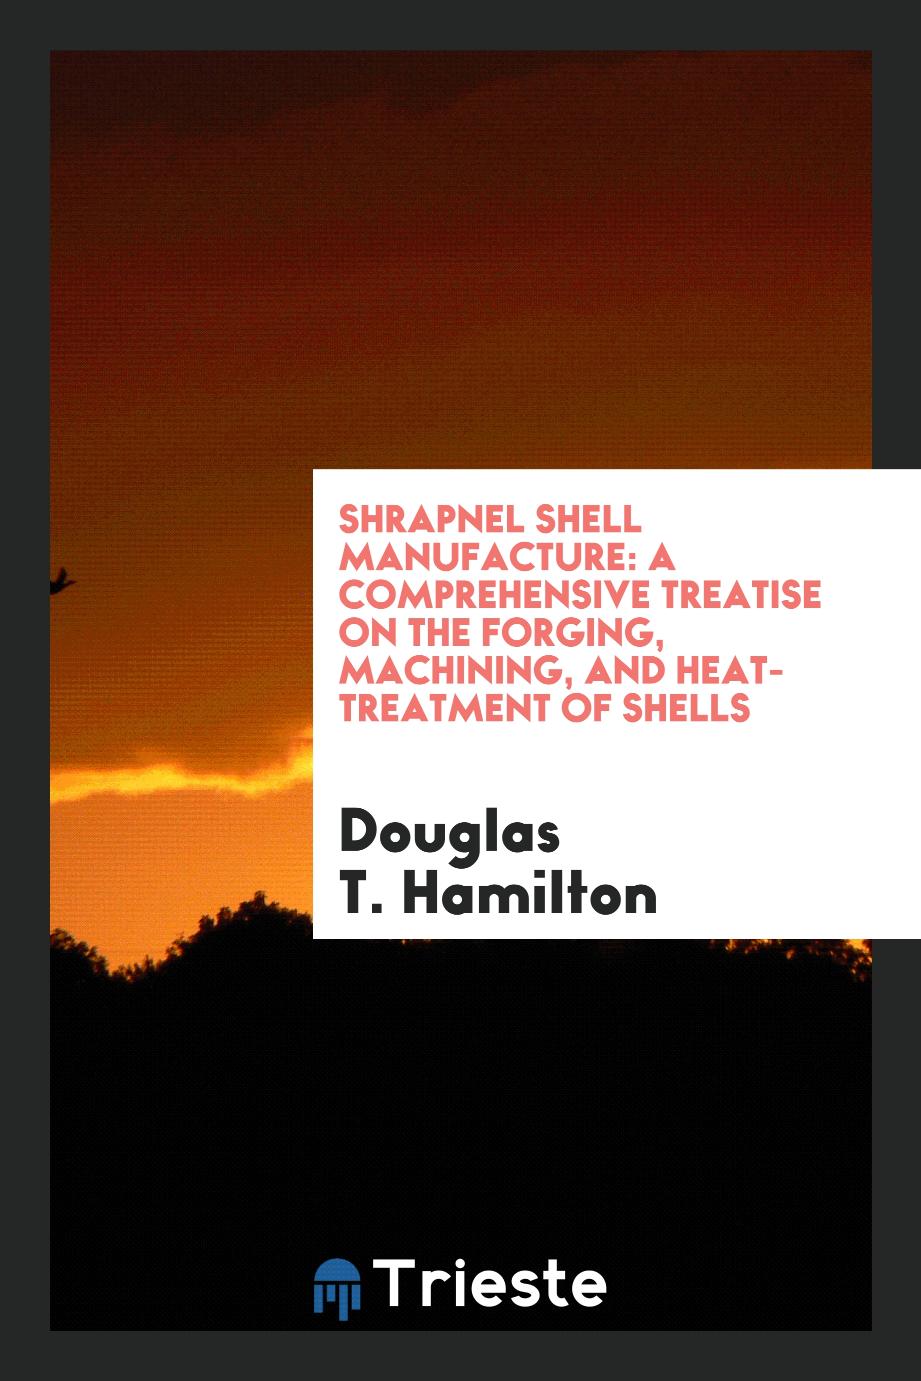 Shrapnel Shell Manufacture: A Comprehensive Treatise on the Forging, Machining, and Heat-Treatment of Shells